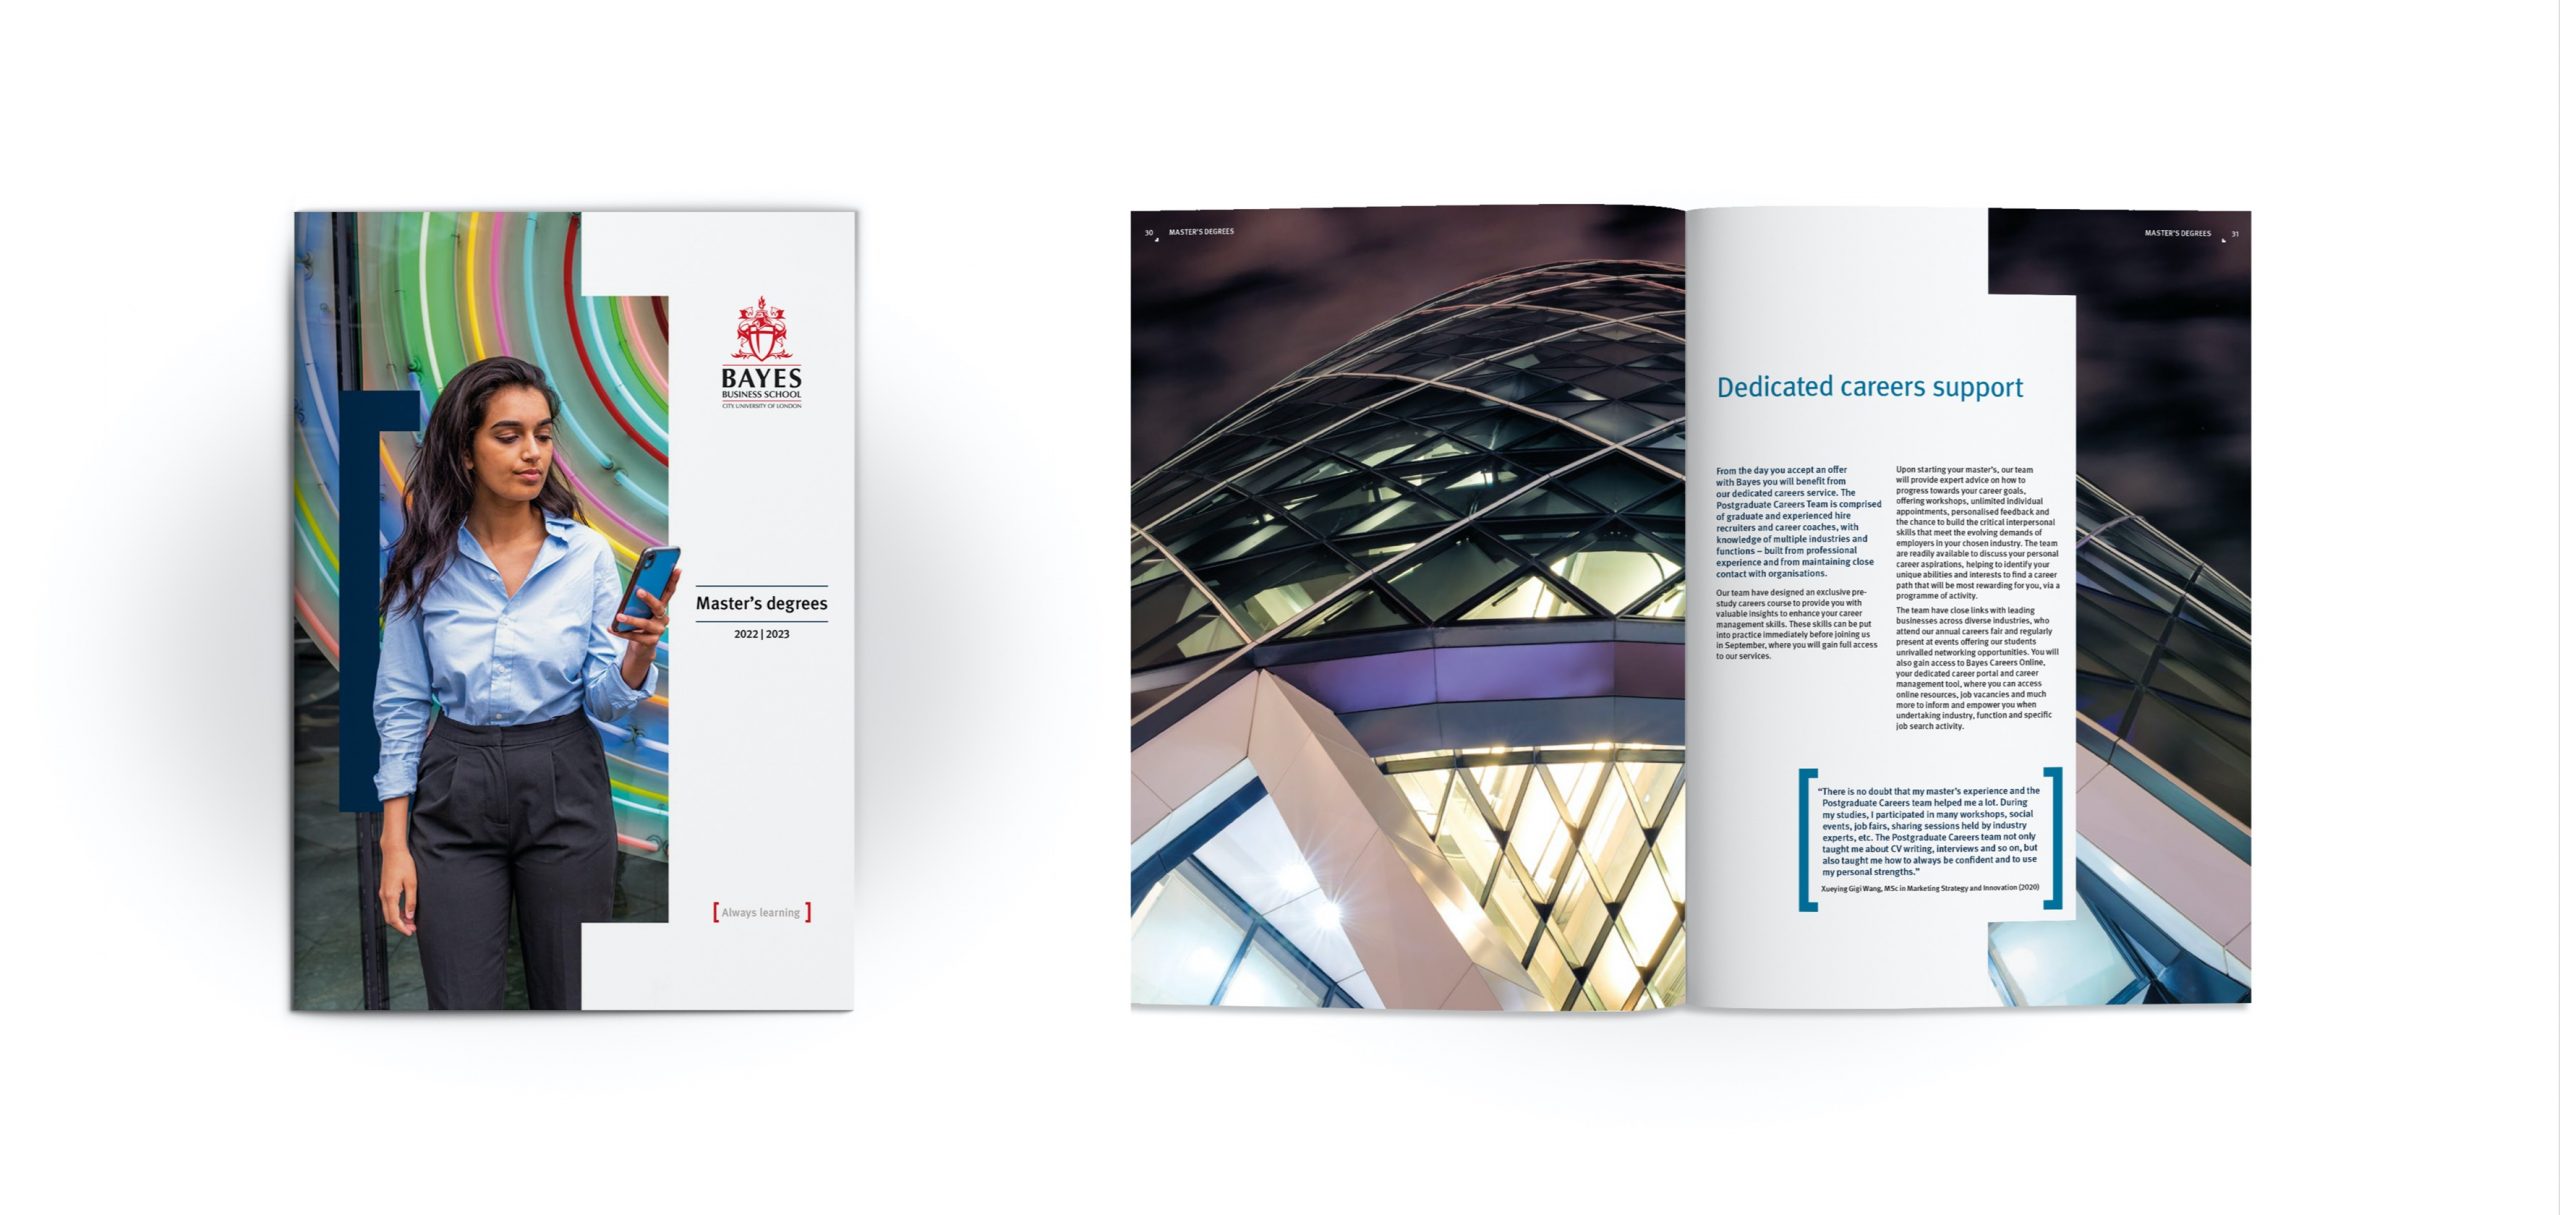 Bayes Business School, Master's Degrees brochure